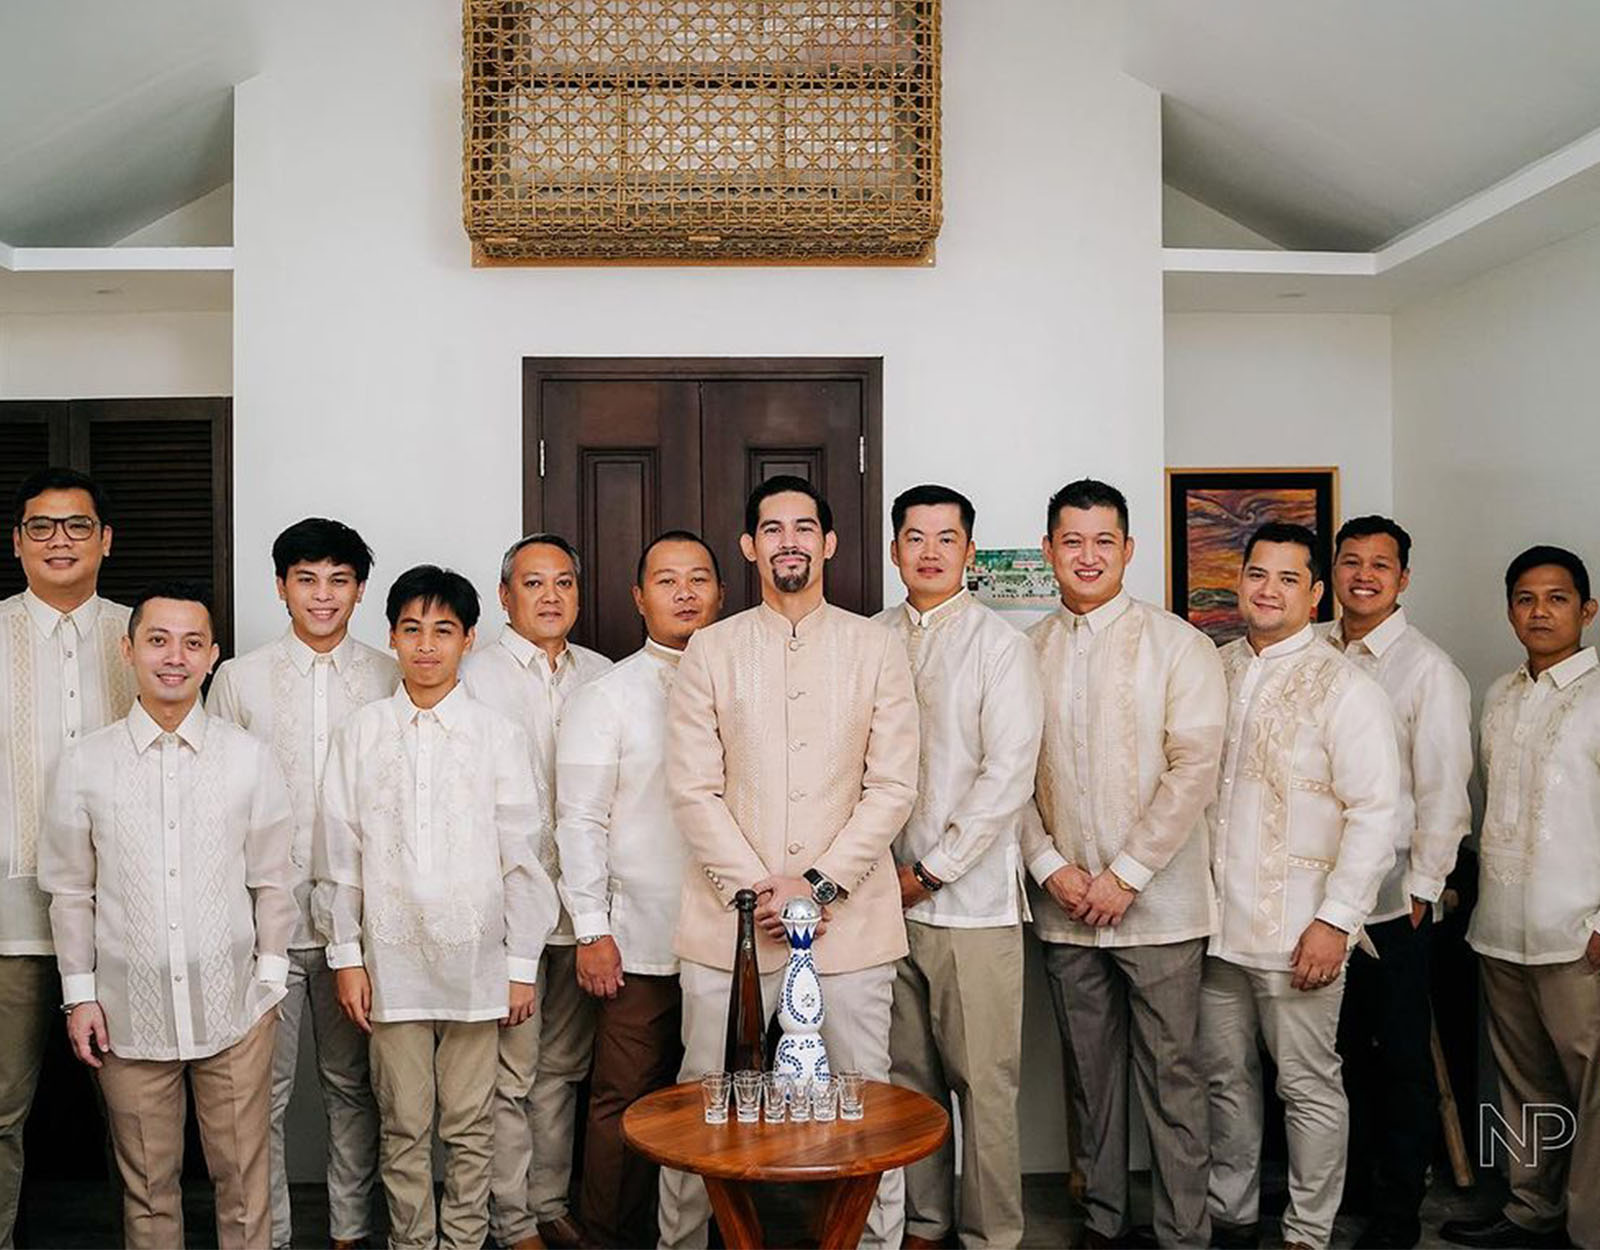 Paolo Paraiso's Kids Were the Best Men in His Wedding